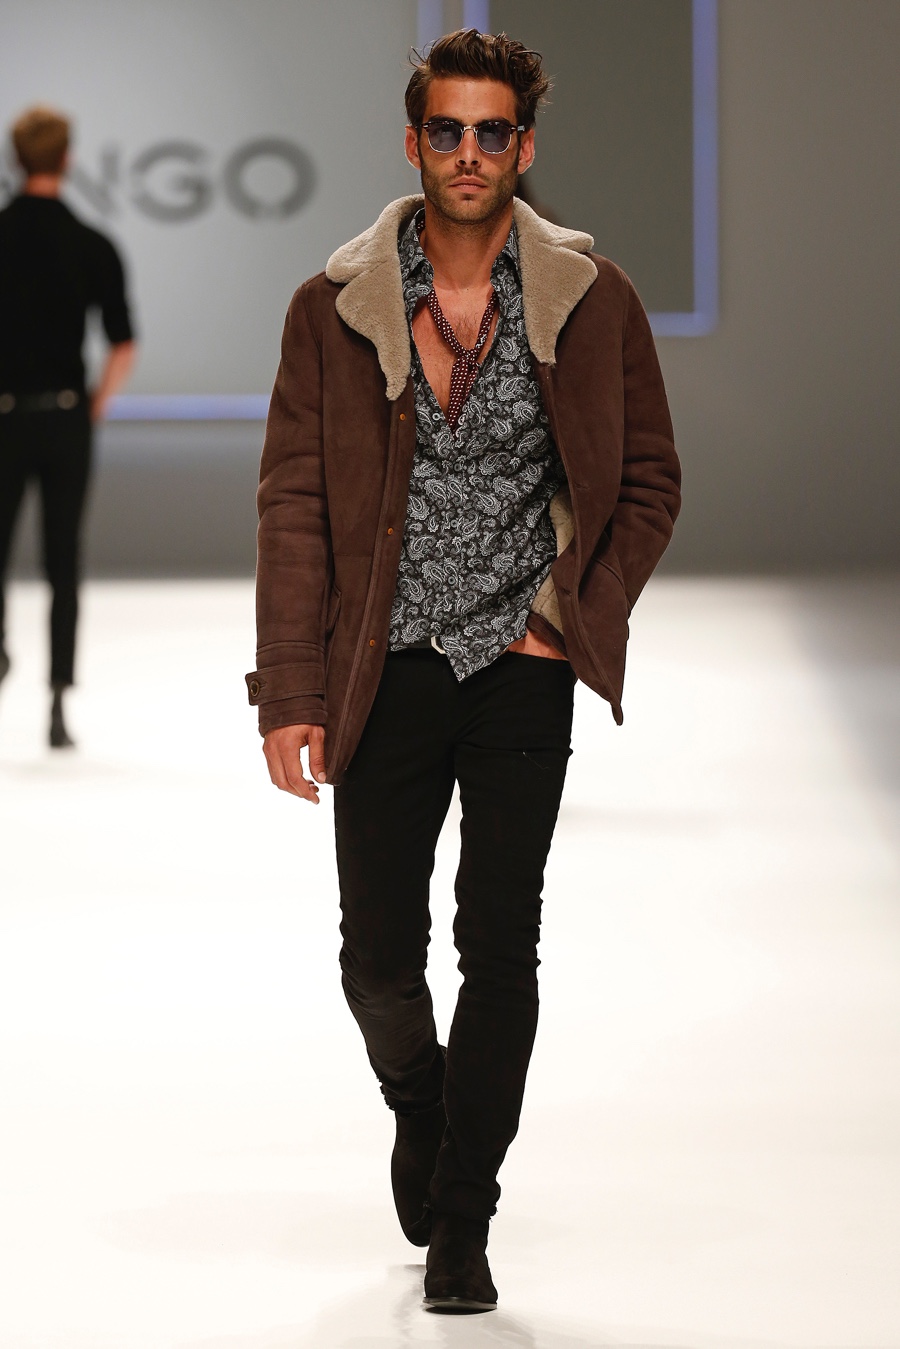 Mango Fall/Winter 2015 Collection Embraces Western Styles